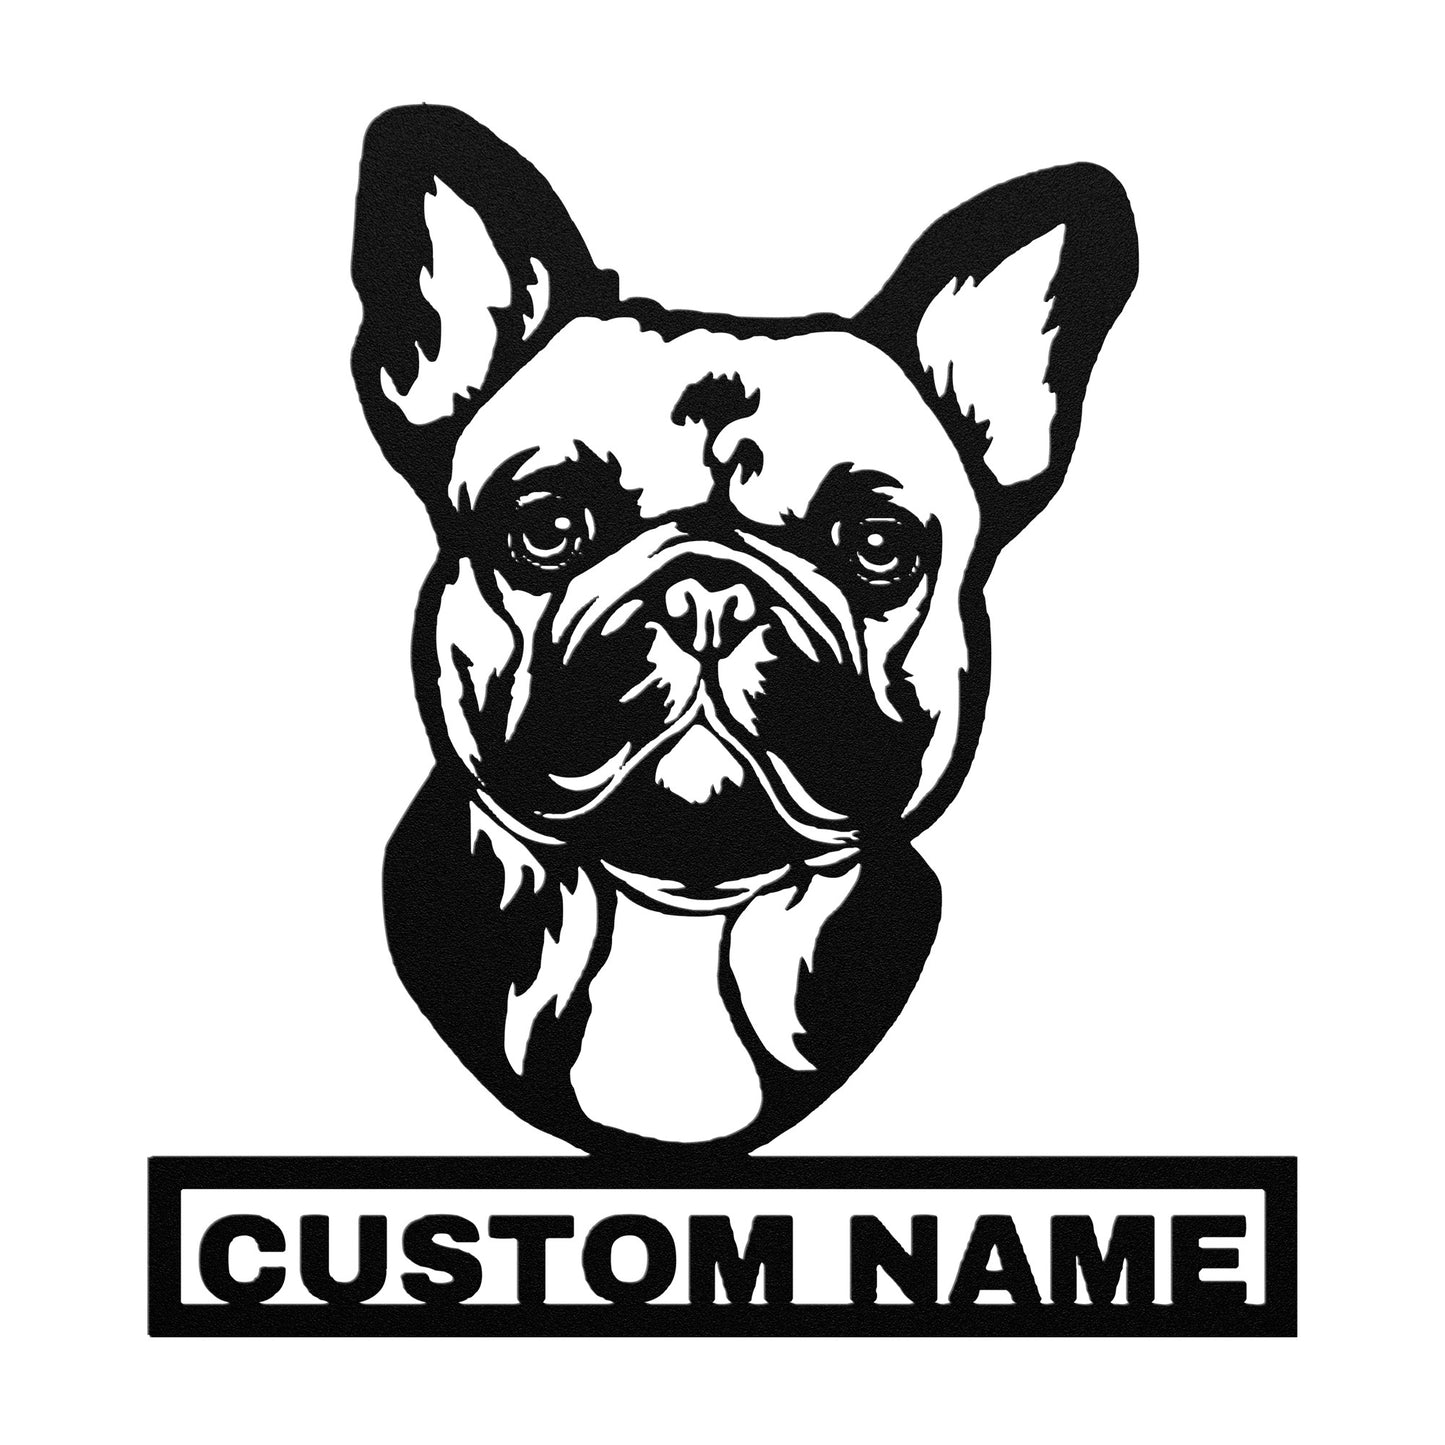 Personalized French Bulldog Dog Metal Sign - French Bulldog Custom Name Wall Decor, Metal Signs Customized Outdoor Indoor, Wall Art Gift For French Bulldog Dog Lover